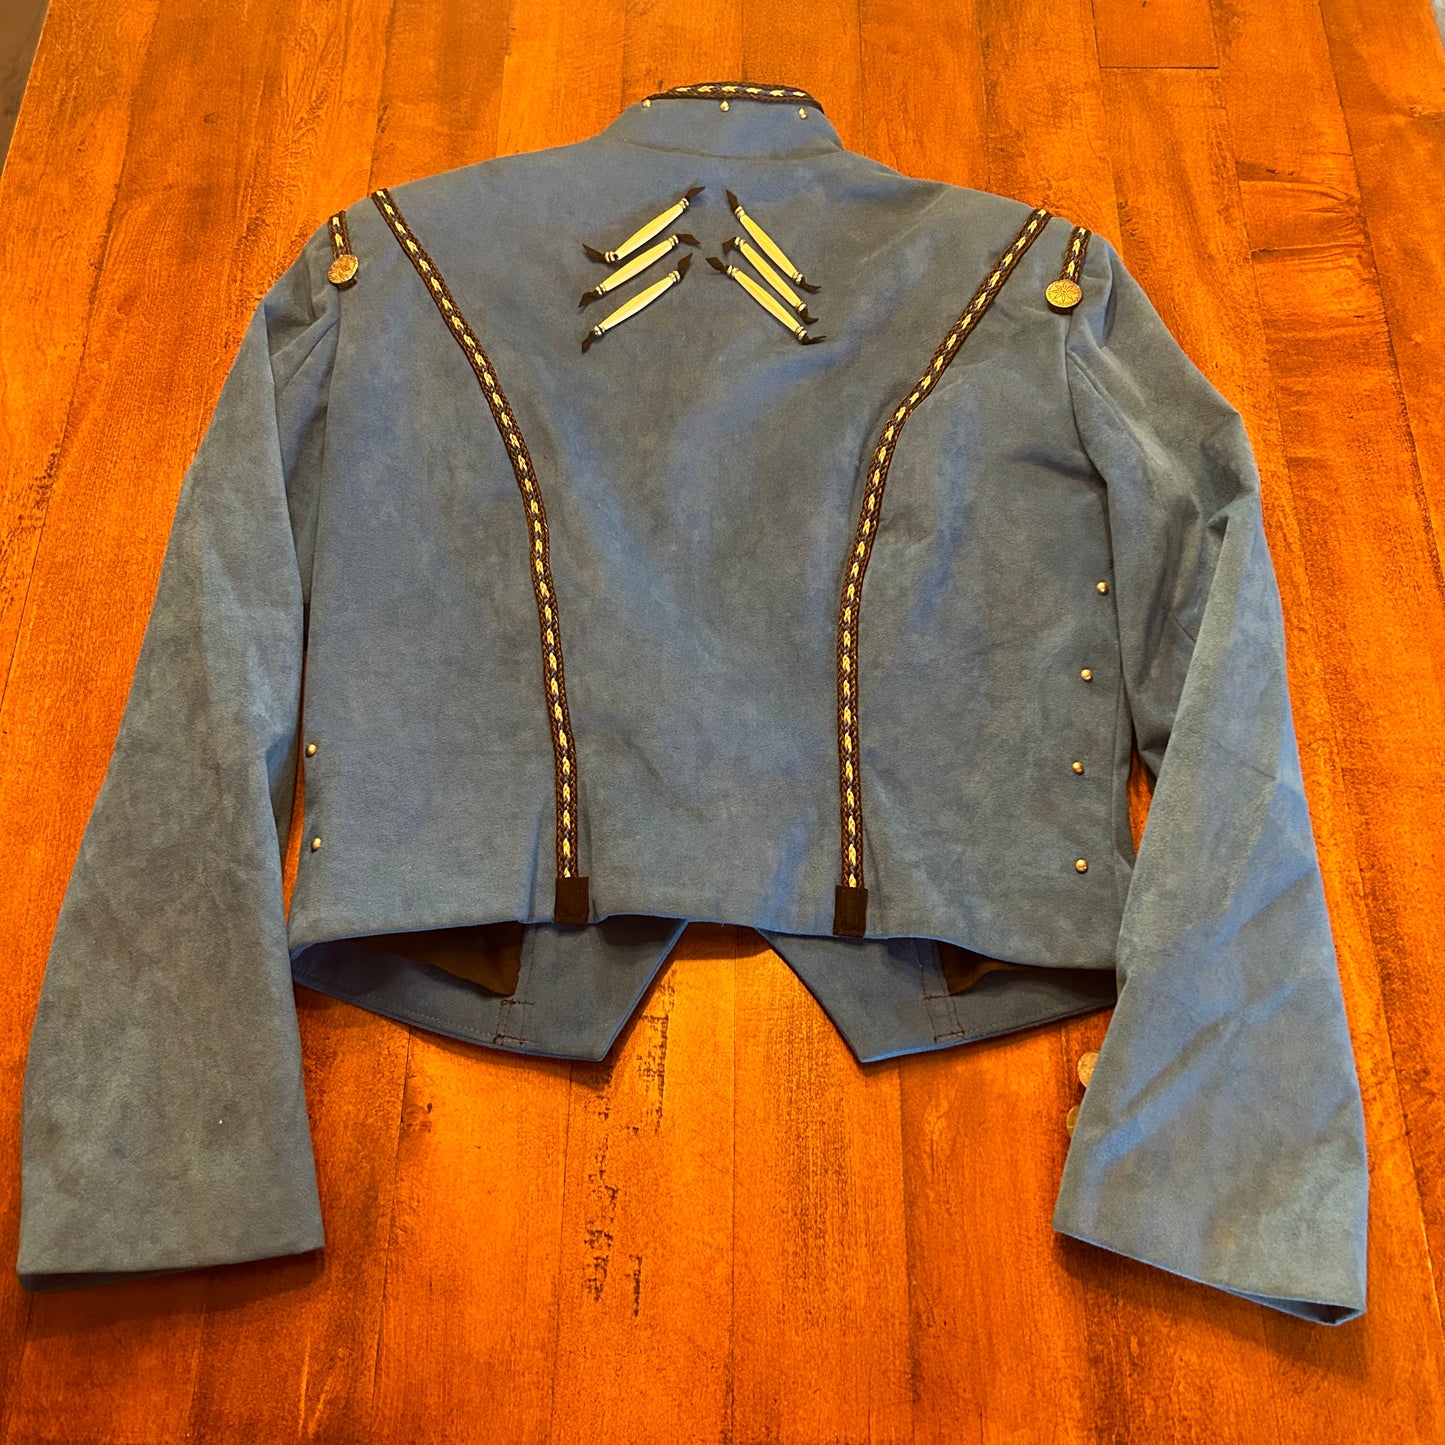 Extremely Rare Jan Lukas Collection Blue Suede Jacket with Braided Horse Hair Size S